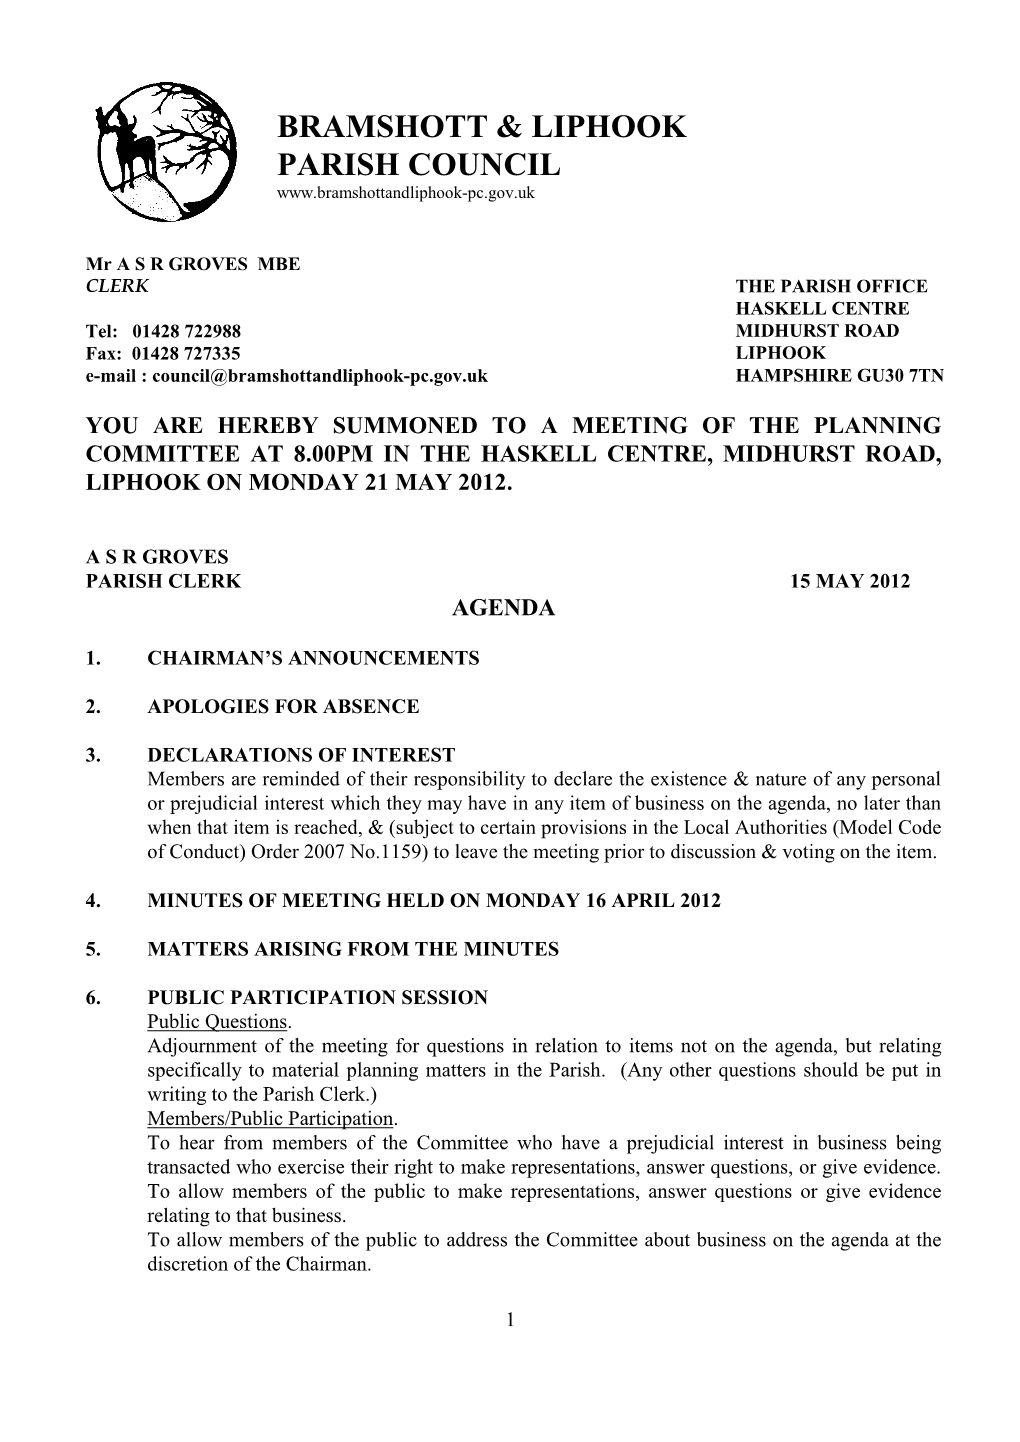 You Are Hereby Summoned to a Meeting of the Planning Committee at 8.00Pm in the Haskell Centre, Midhurst Road, Liphook on Monday 21 May 2012